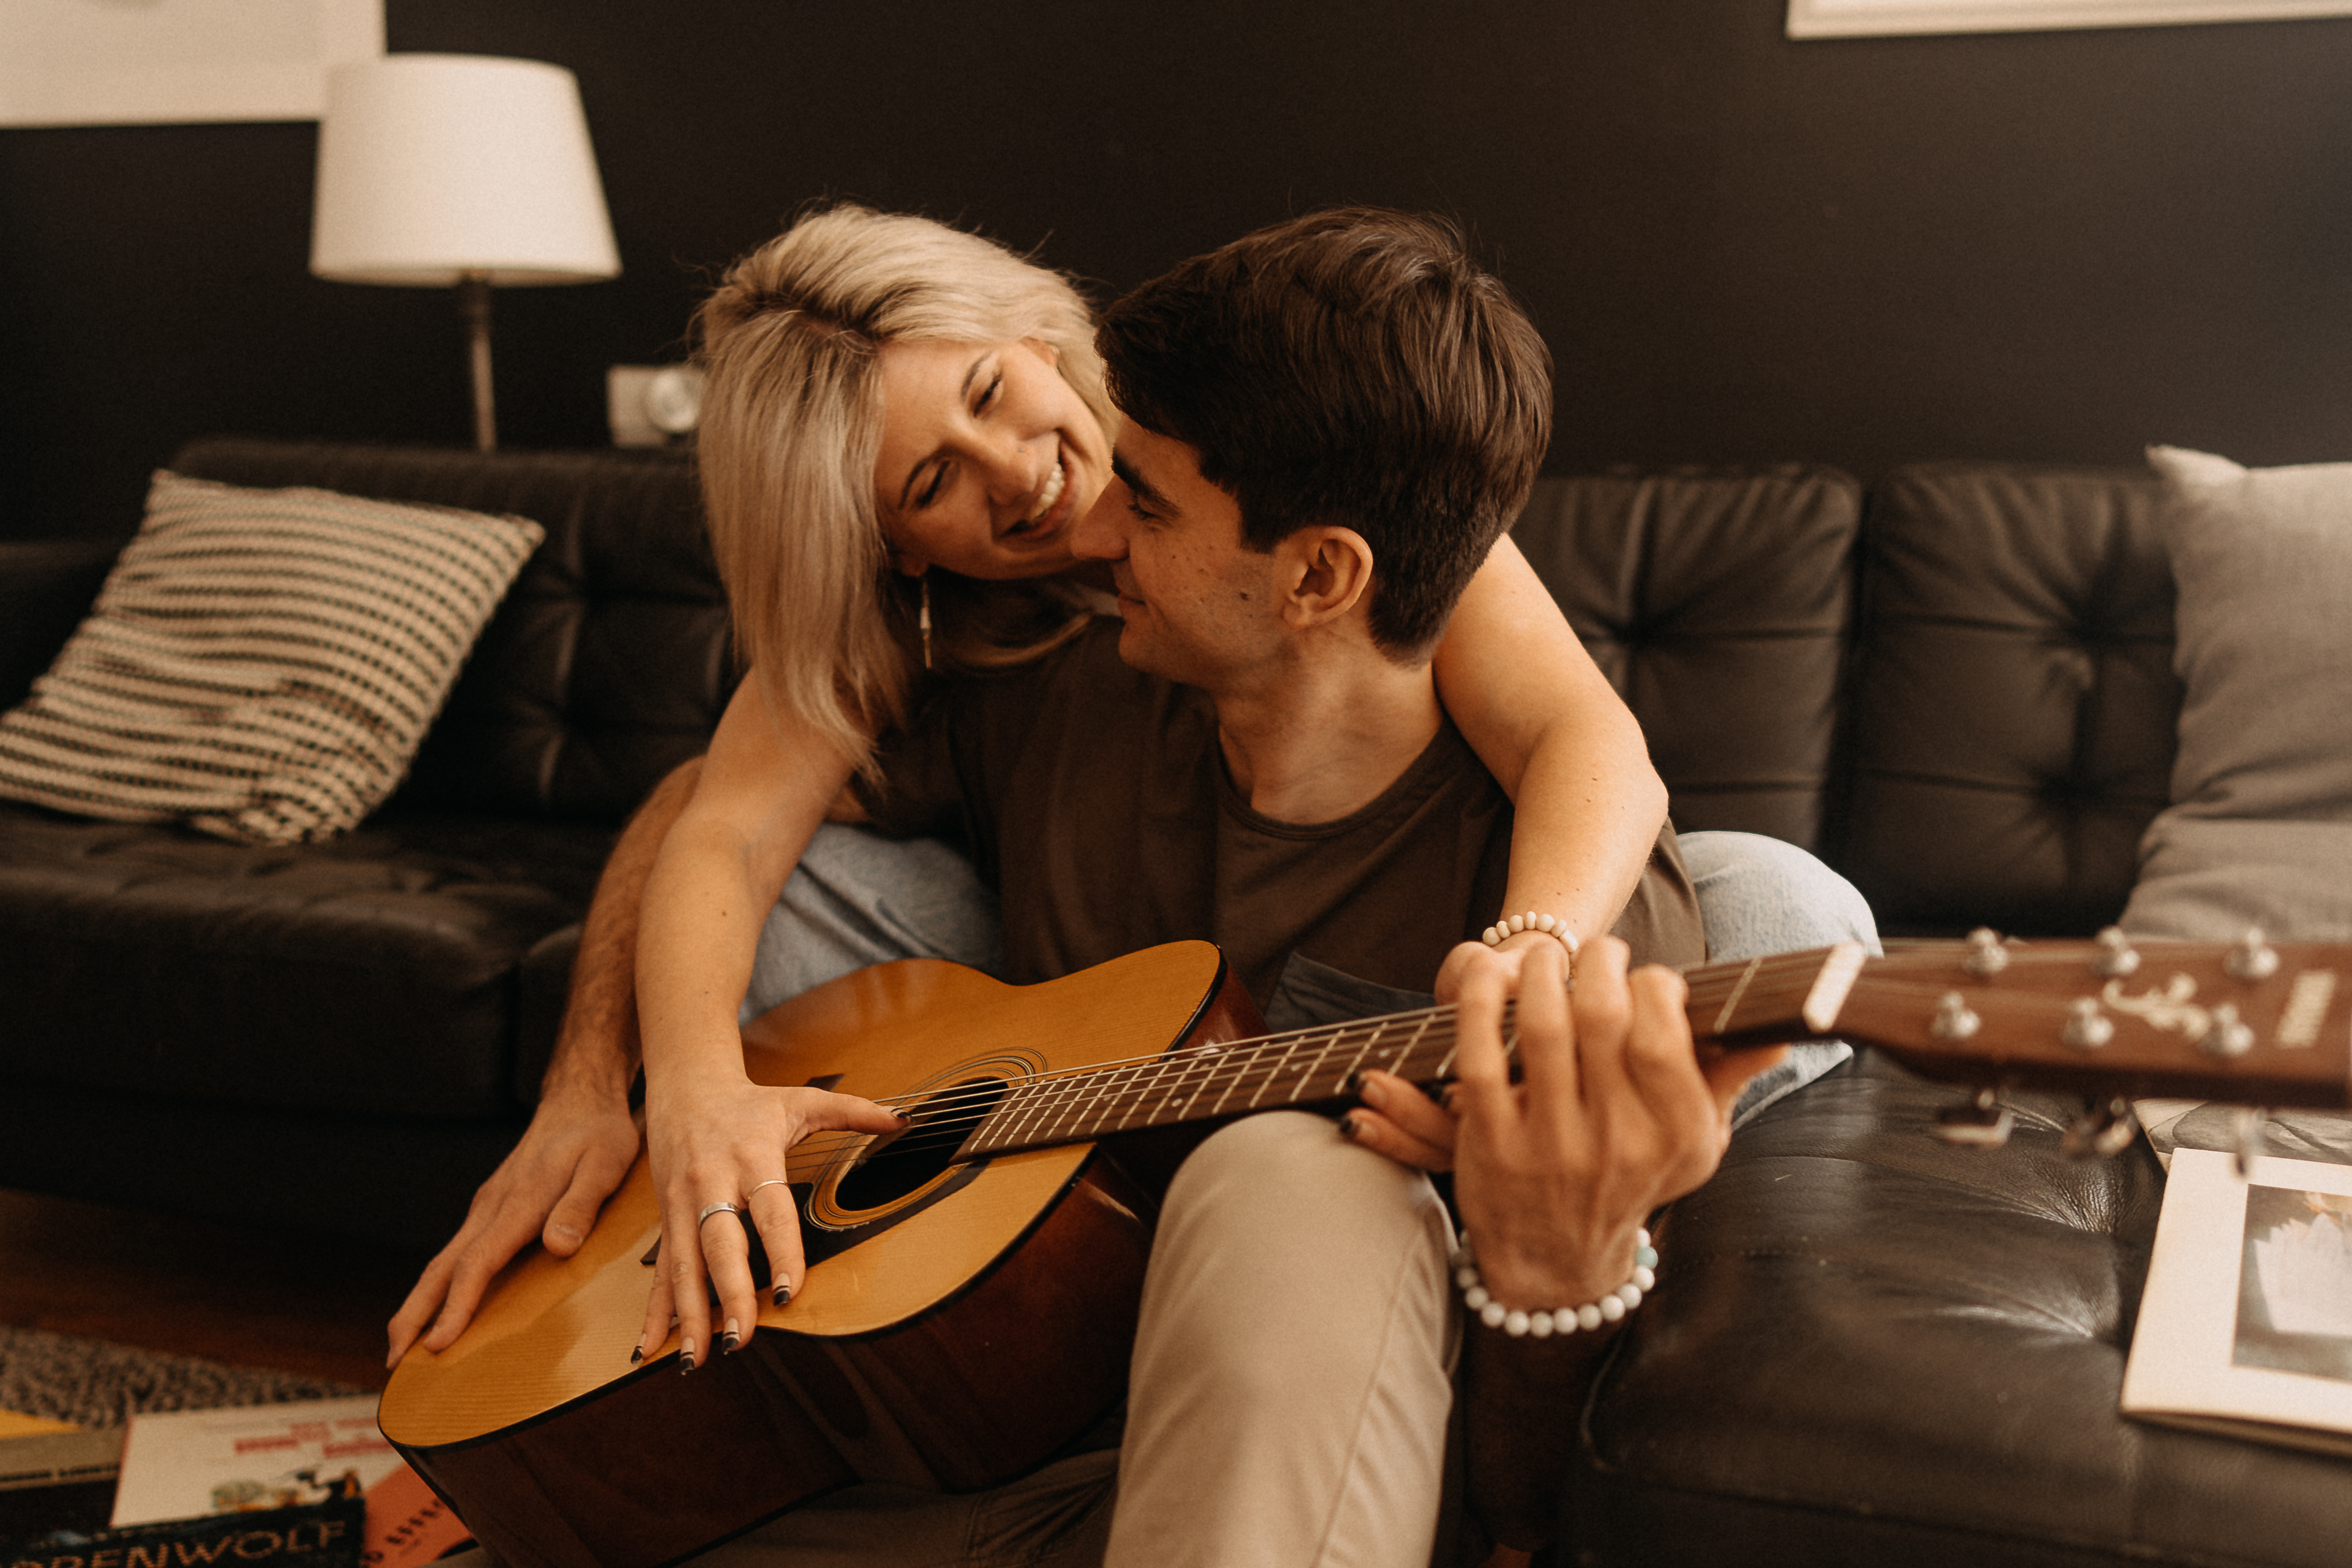 https://winsomephotos.co/wp-content/uploads/2023/03/intimate-connection-session-with-twin-cities-couples-photographer-K7401[000-999].jpg